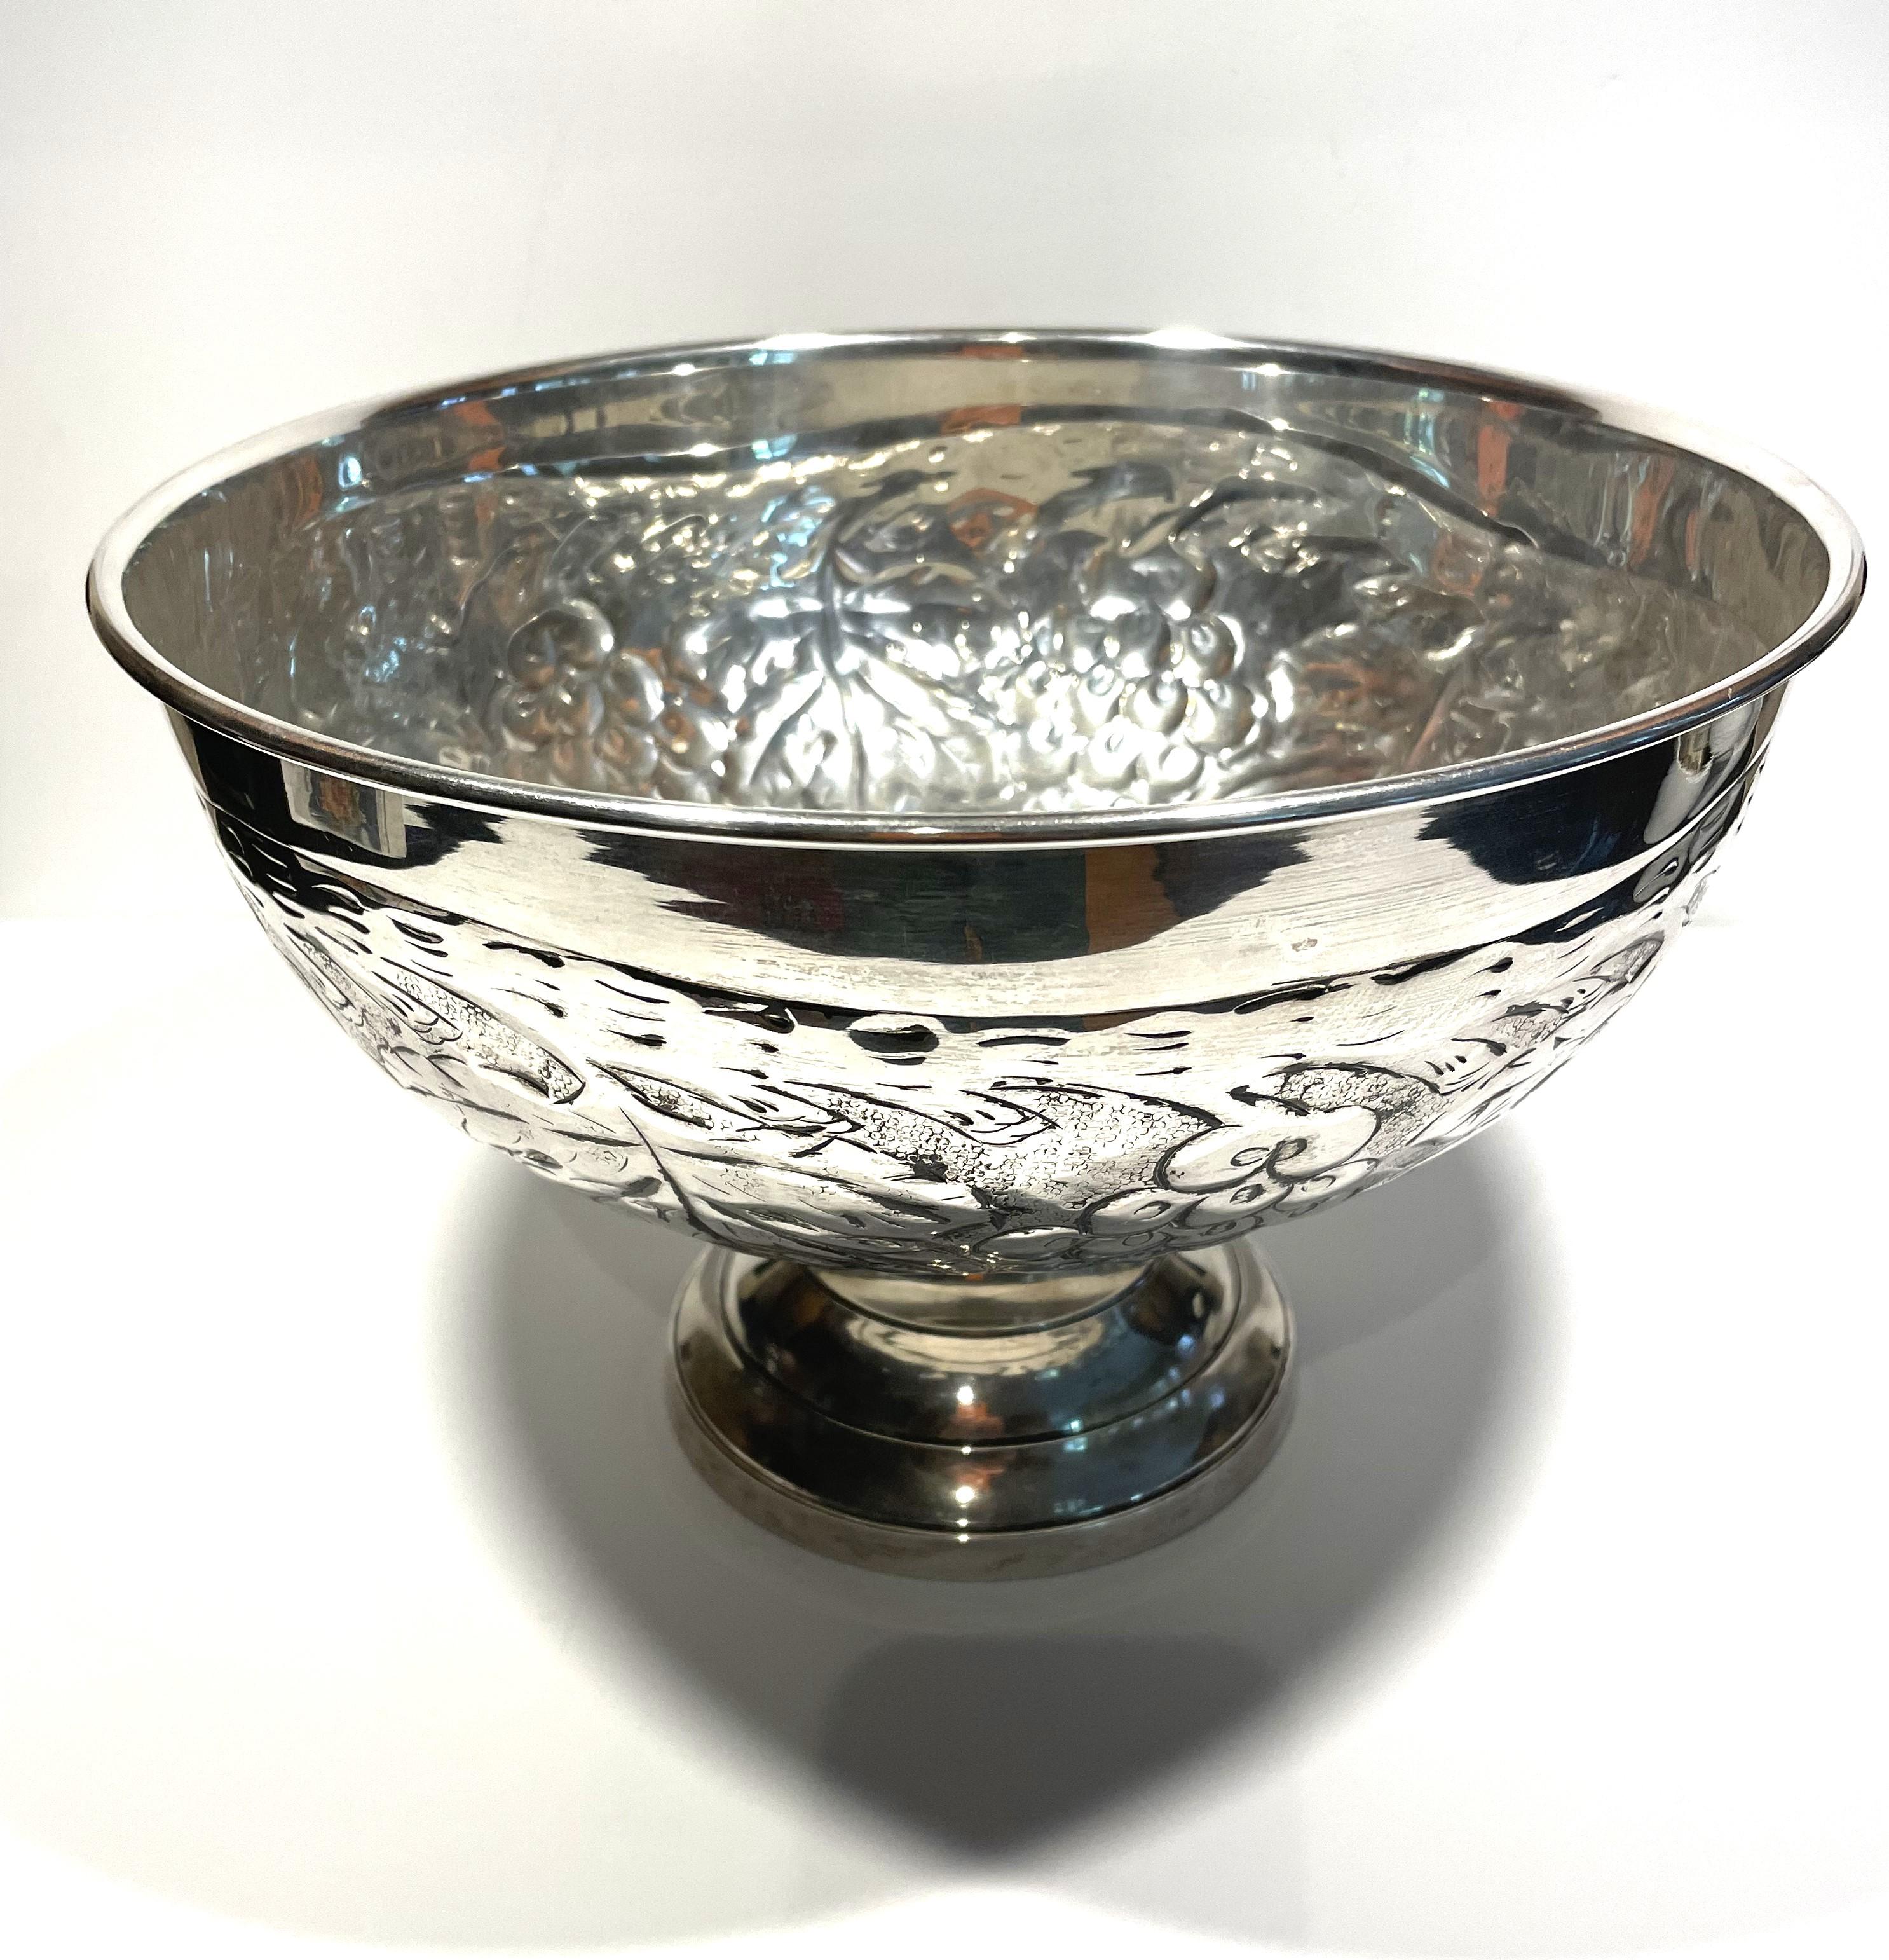 Spanish Colonial Vintage Artisanal Silver Urn For Sale